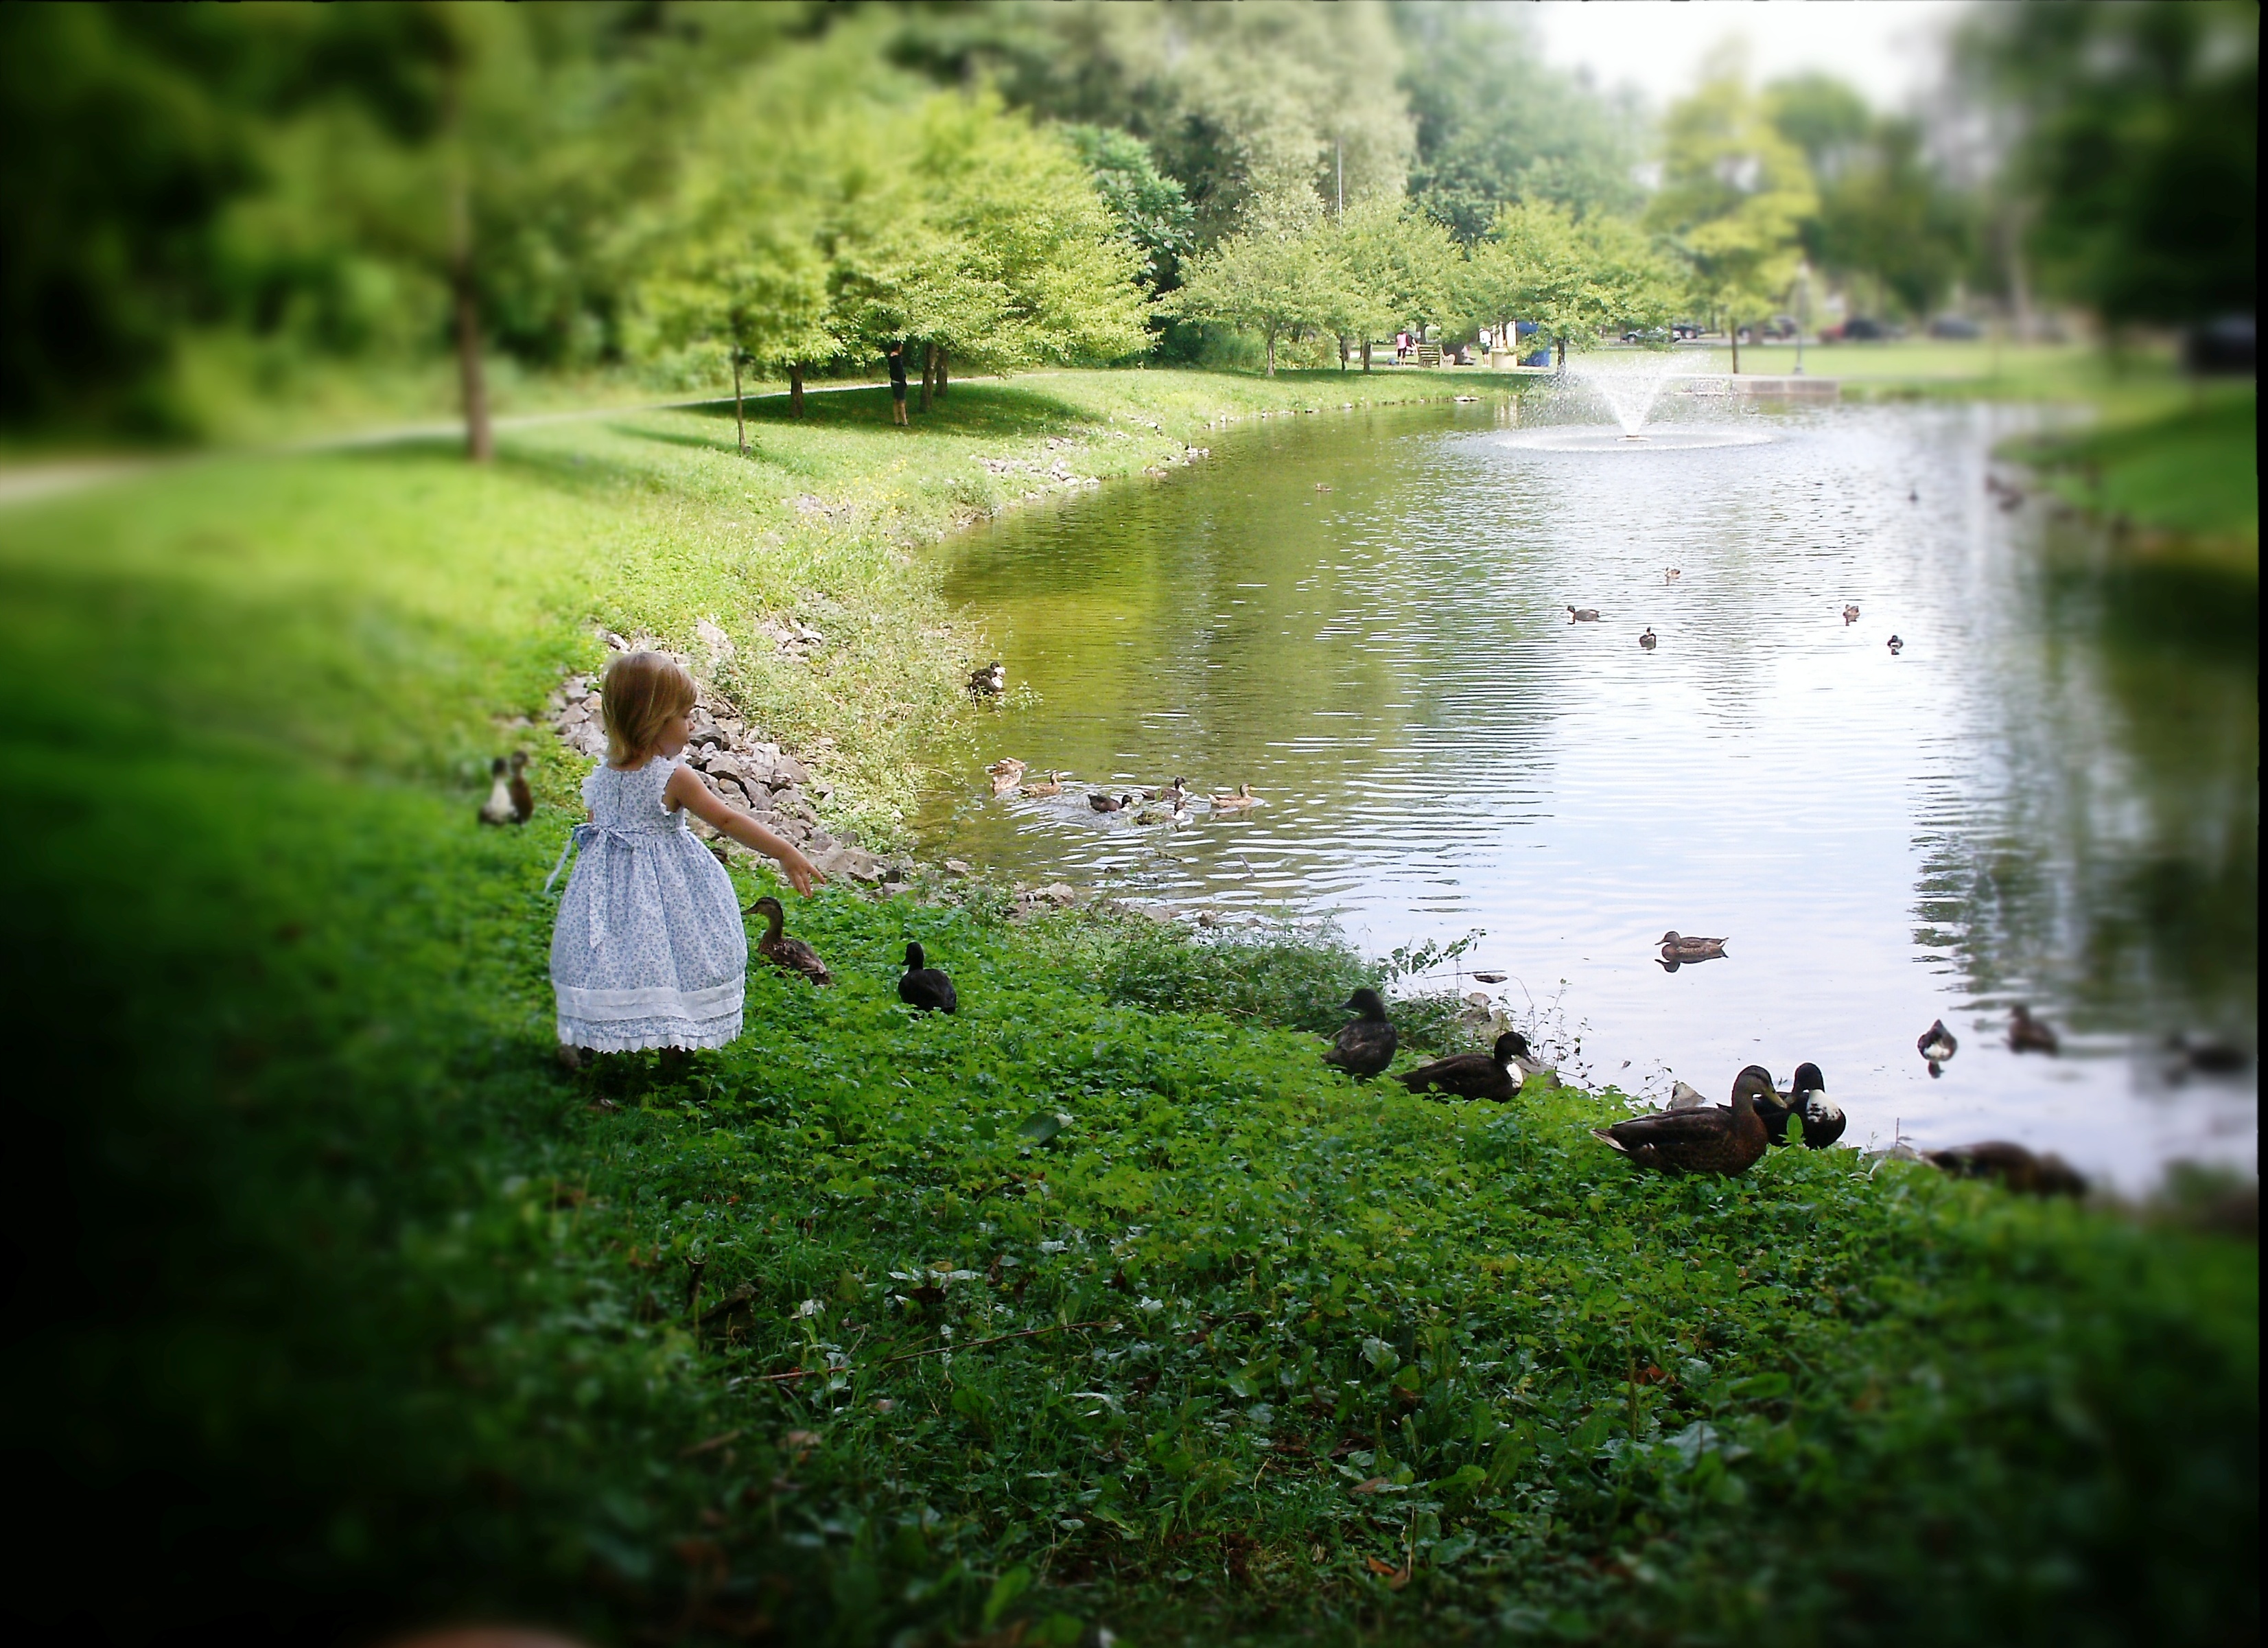 Girl in Saratoga's Congress Park with ducks in July 2013 by Heavenly Ryan